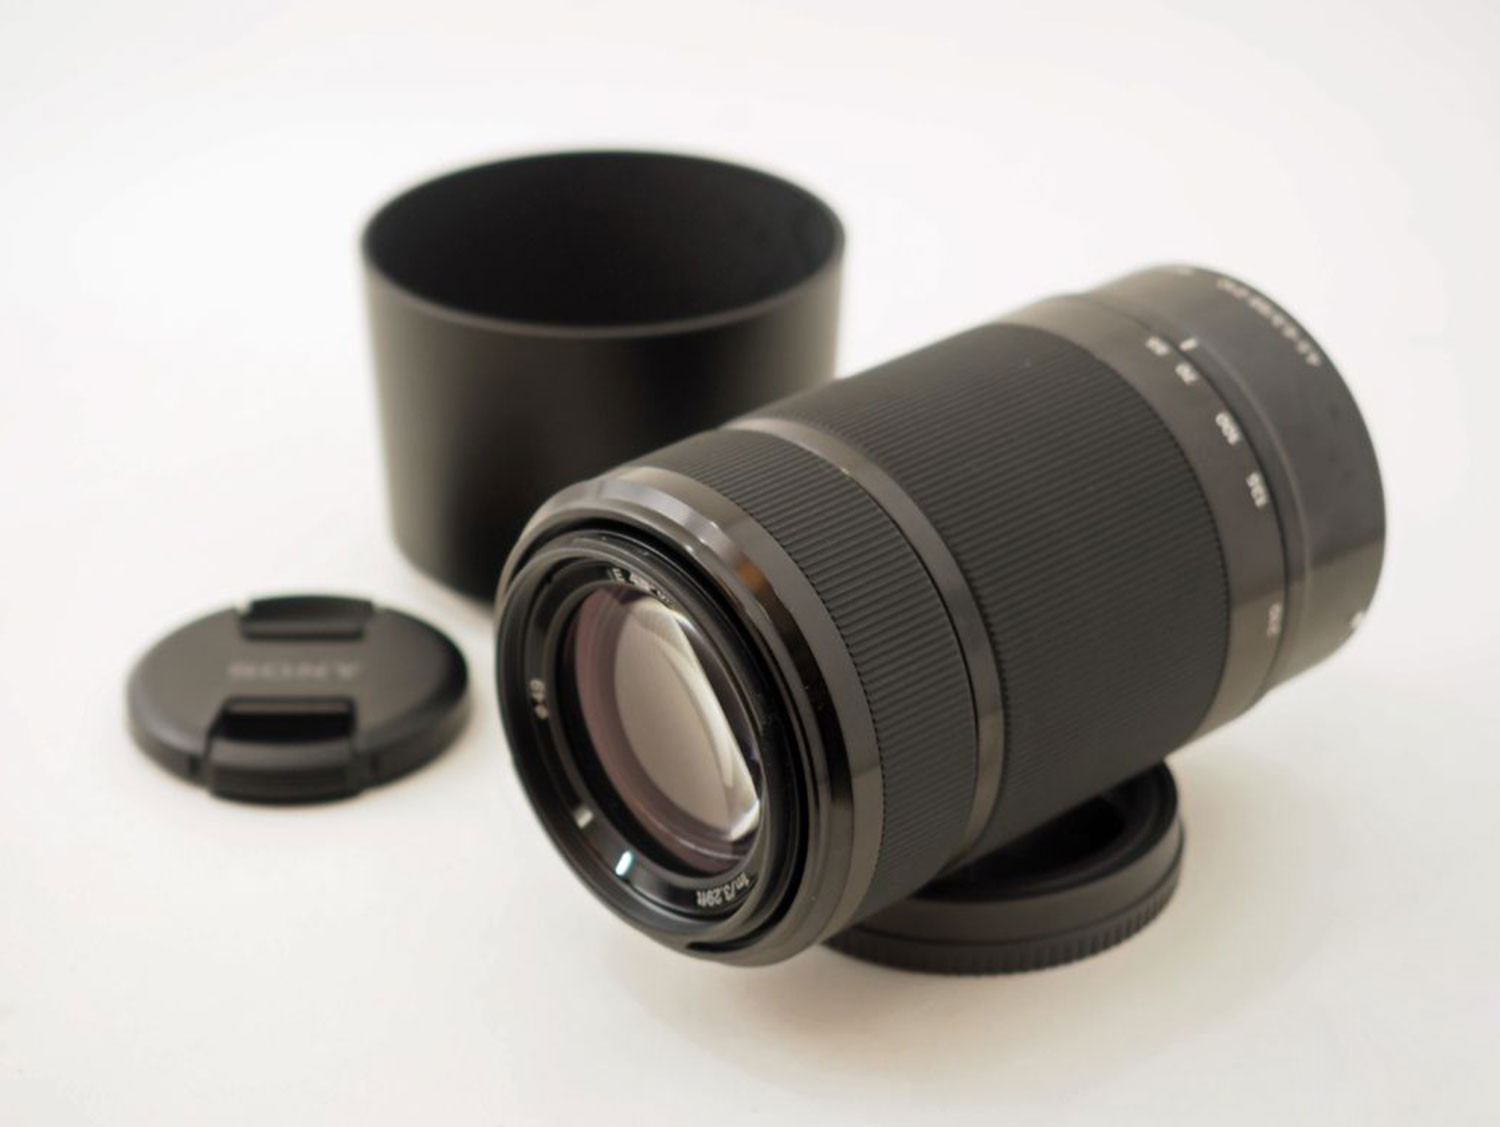 Sony E 55-210mm F4.5-6.3 Lens - Side View